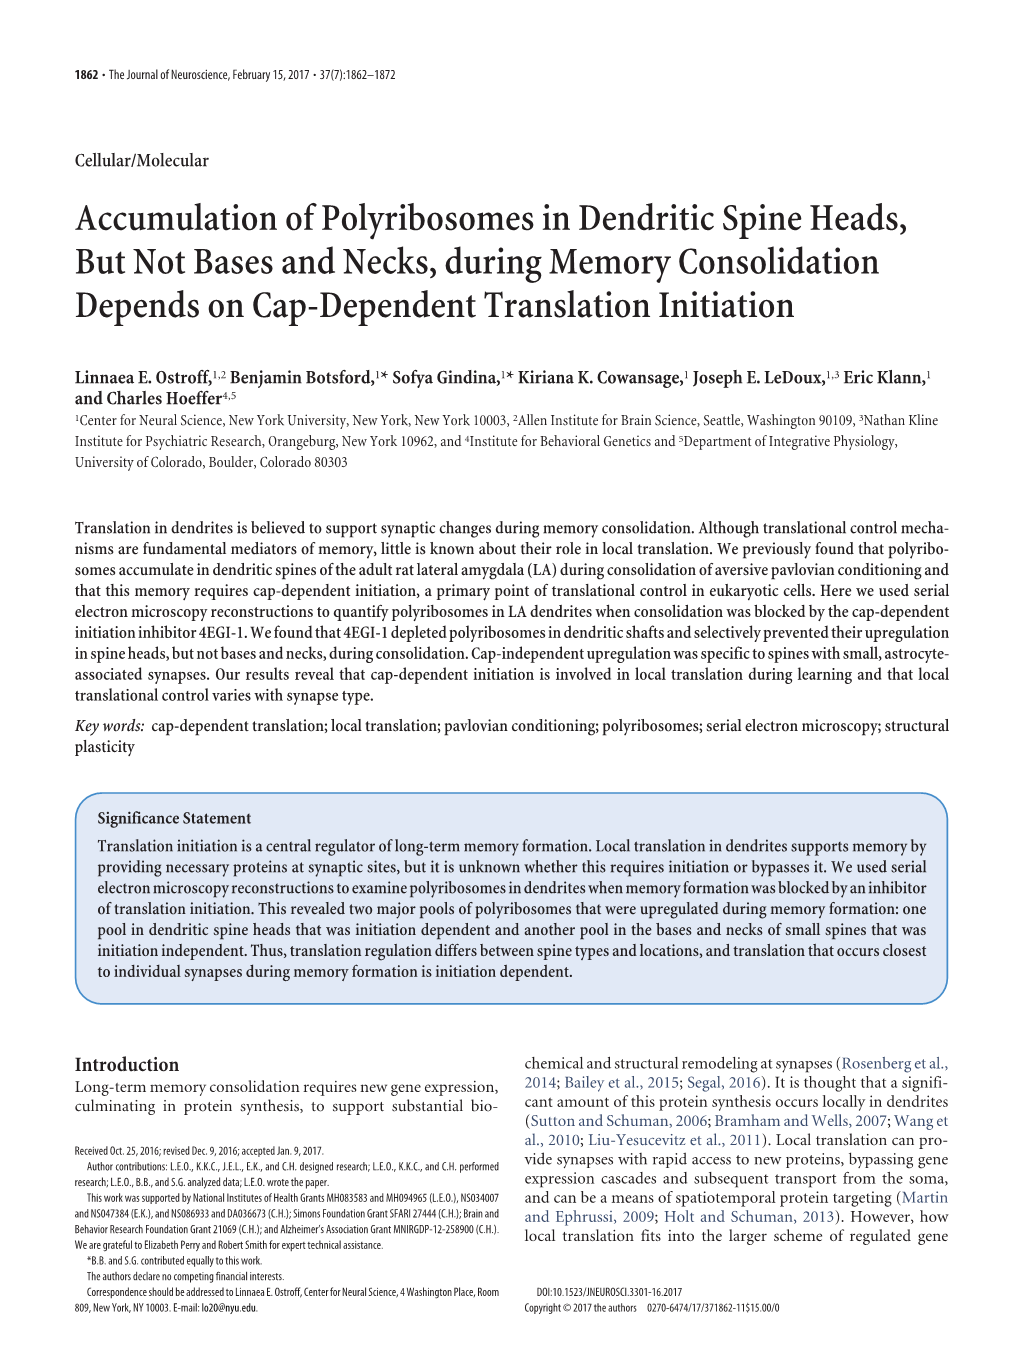 Accumulation of Polyribosomes in Dendritic Spine Heads, but Not Bases and Necks, During Memory Consolidation Depends on Cap-Dependent Translation Initiation